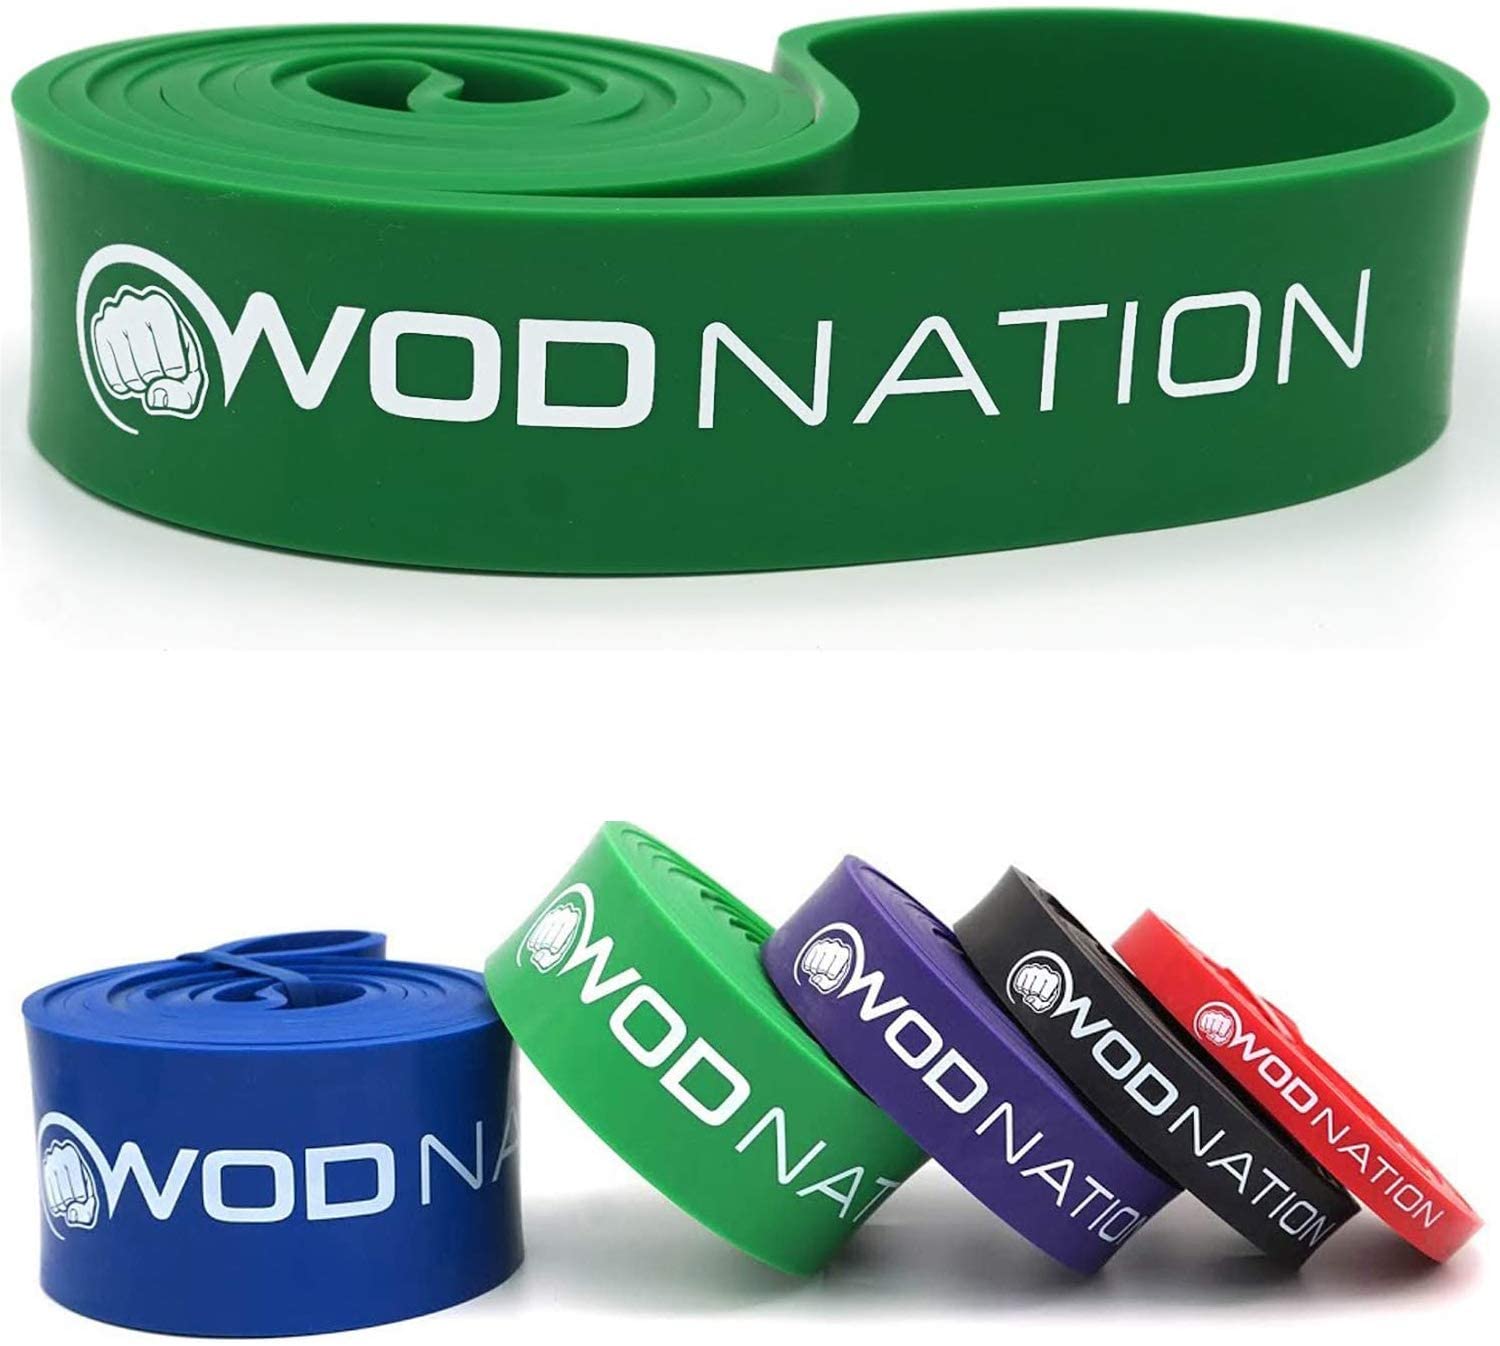 WOD Nation Pullup assist band